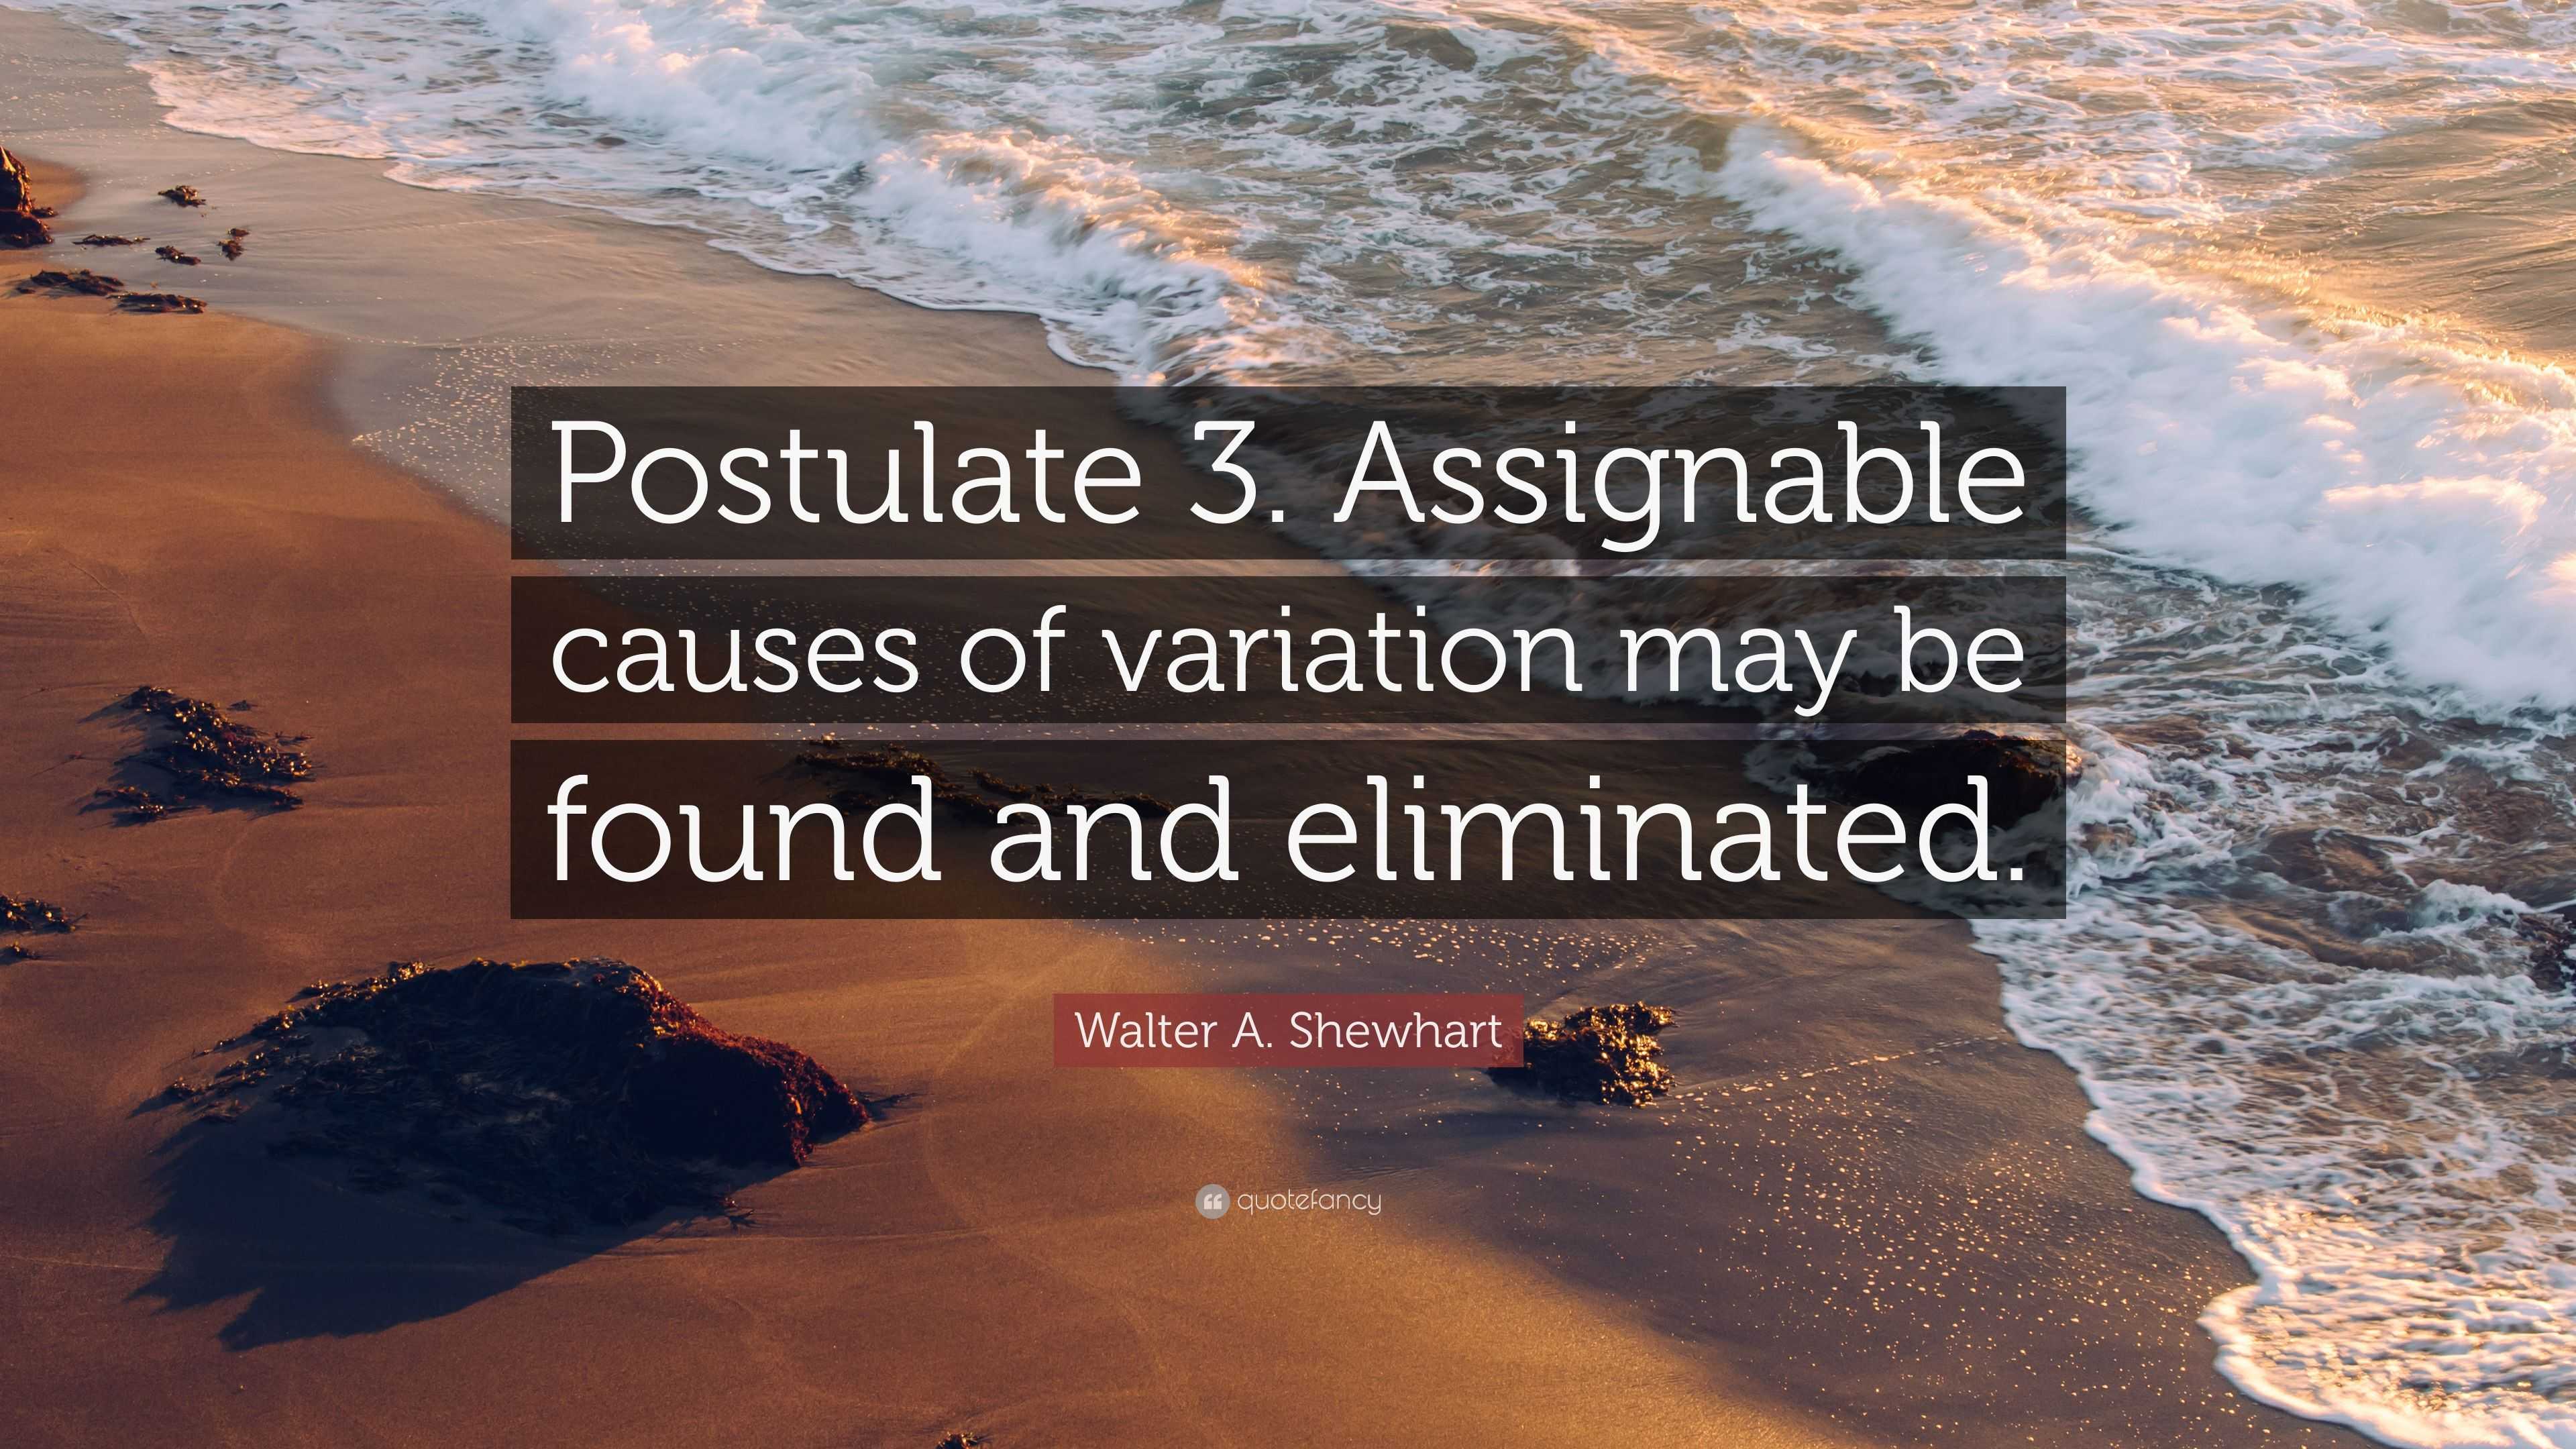 Walter A. Shewhart Quote: “Postulate 3. Assignable causes of variation ...